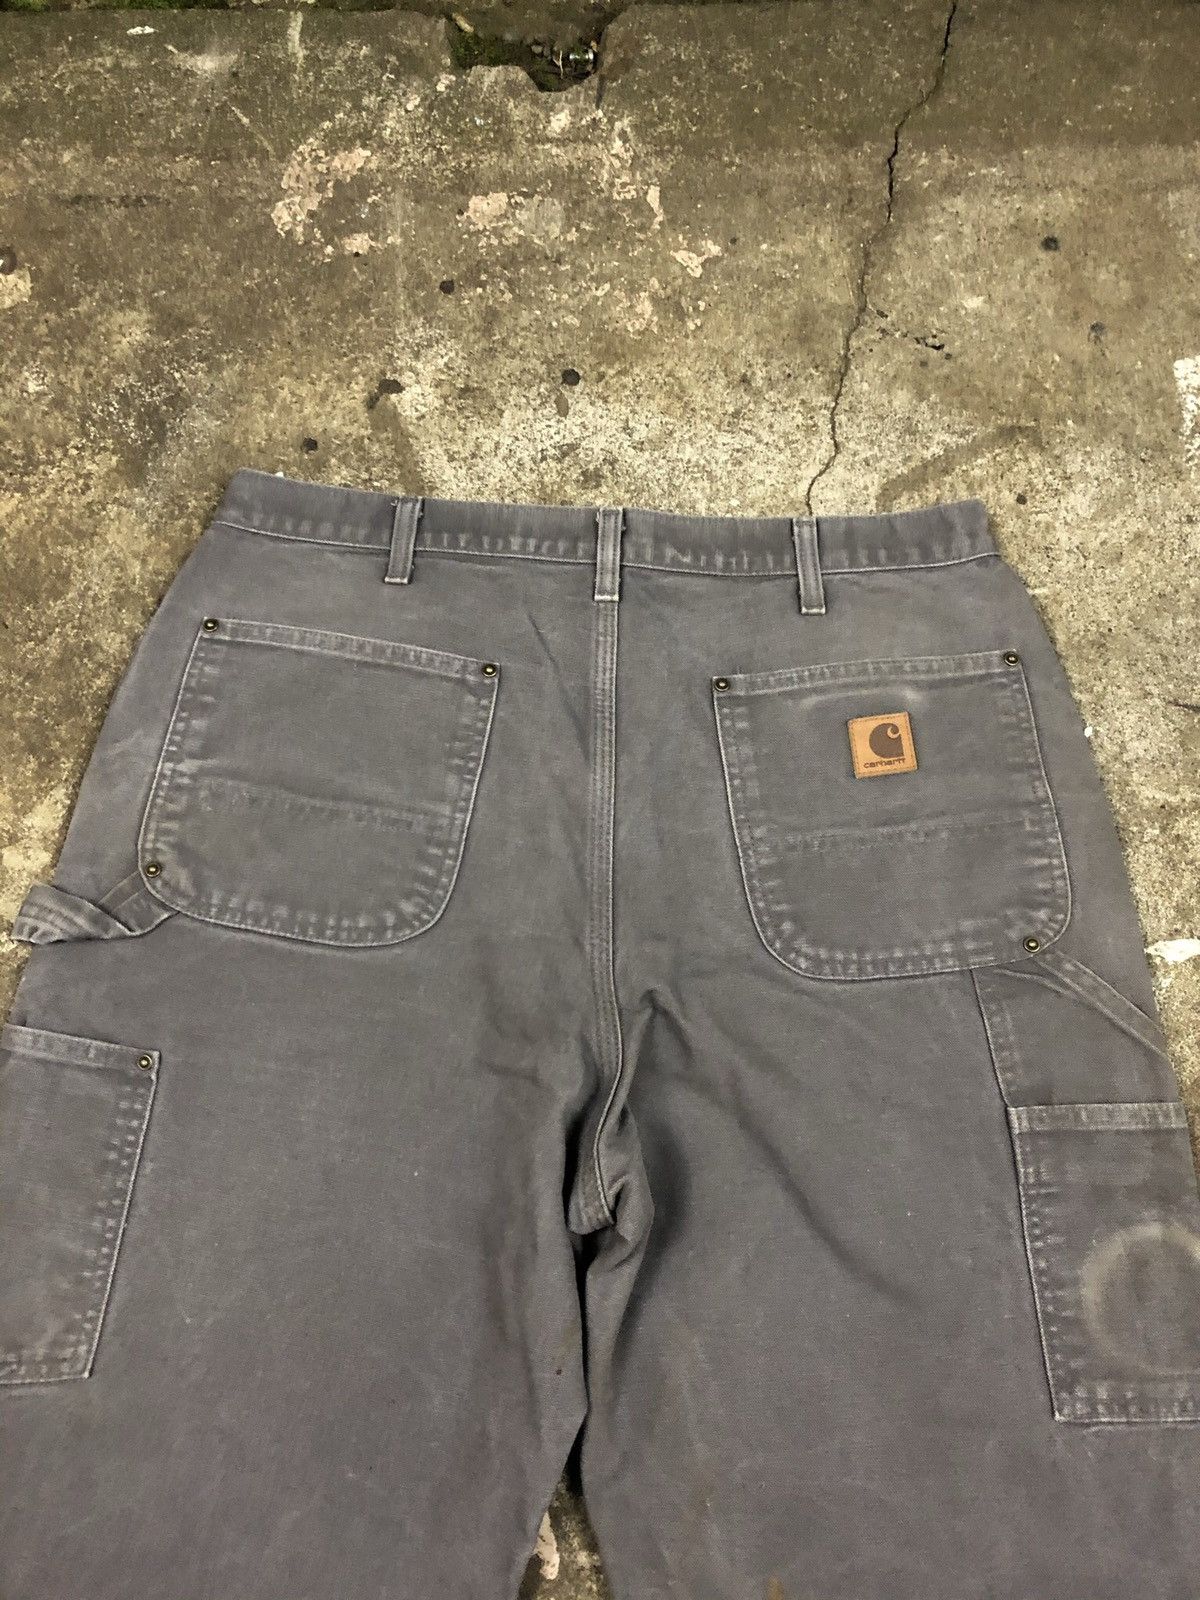 Vintage Carhartt Double Knee Work Pants 34x36 Faded Distressed Size US 34 / EU 50 - 4 Thumbnail